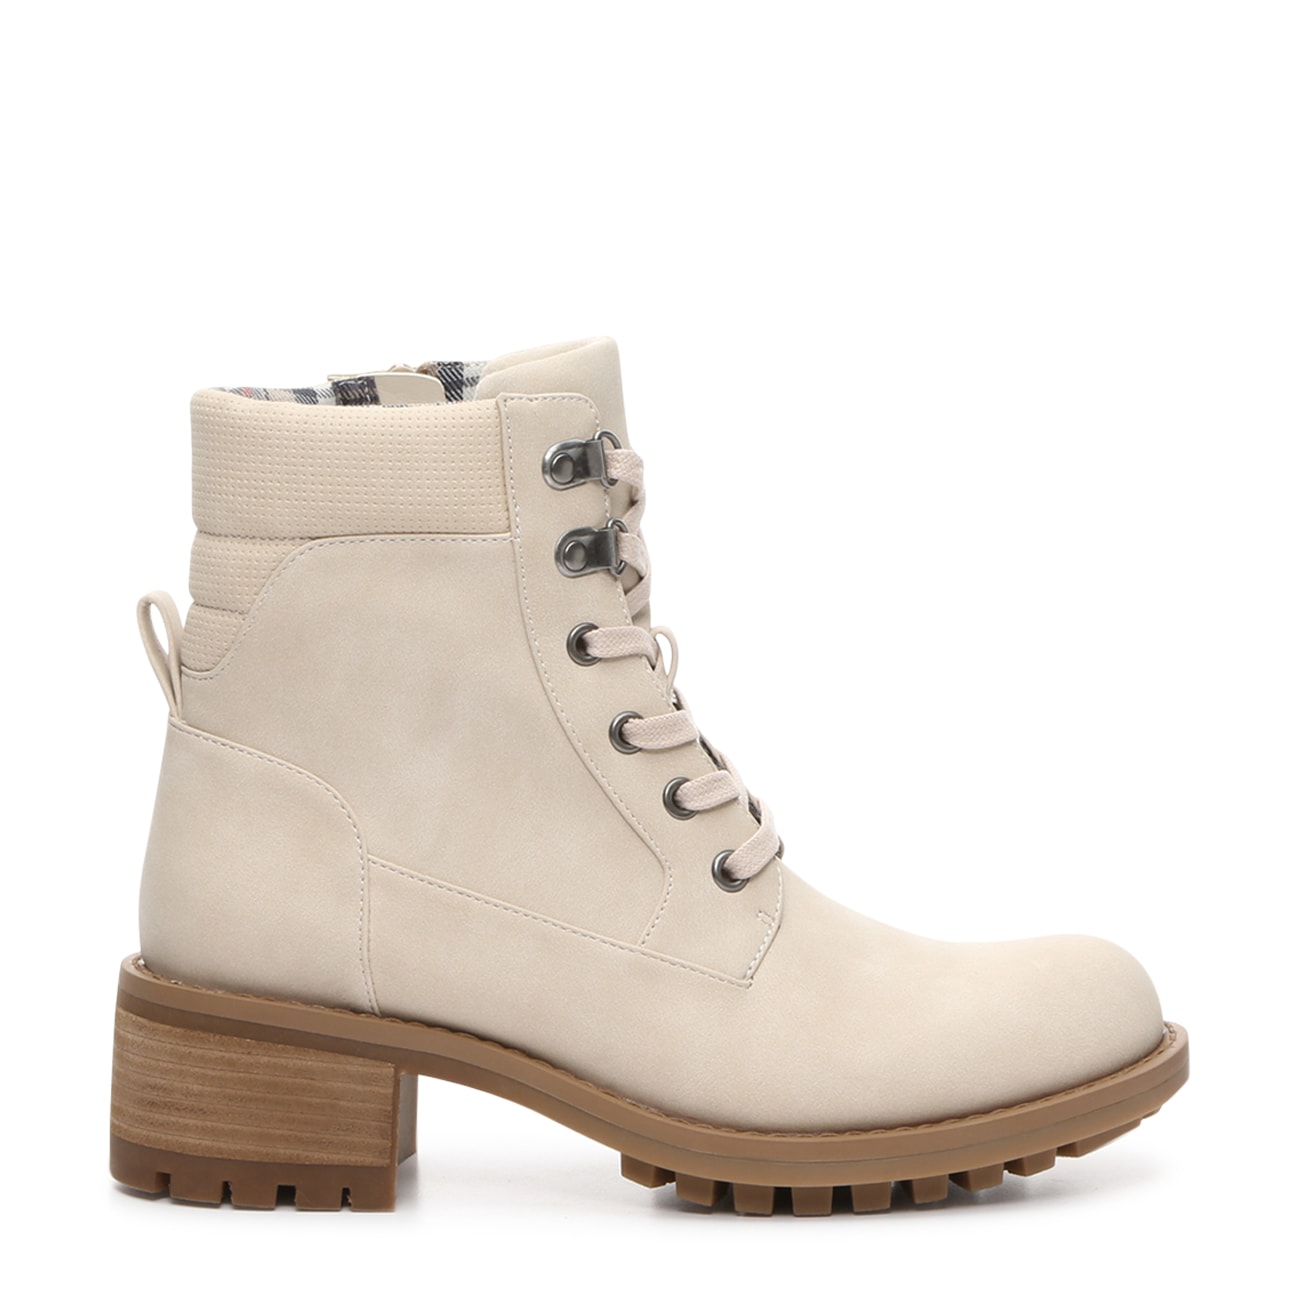 Crown Vintage Marley Combat Boot | The Shoe Company